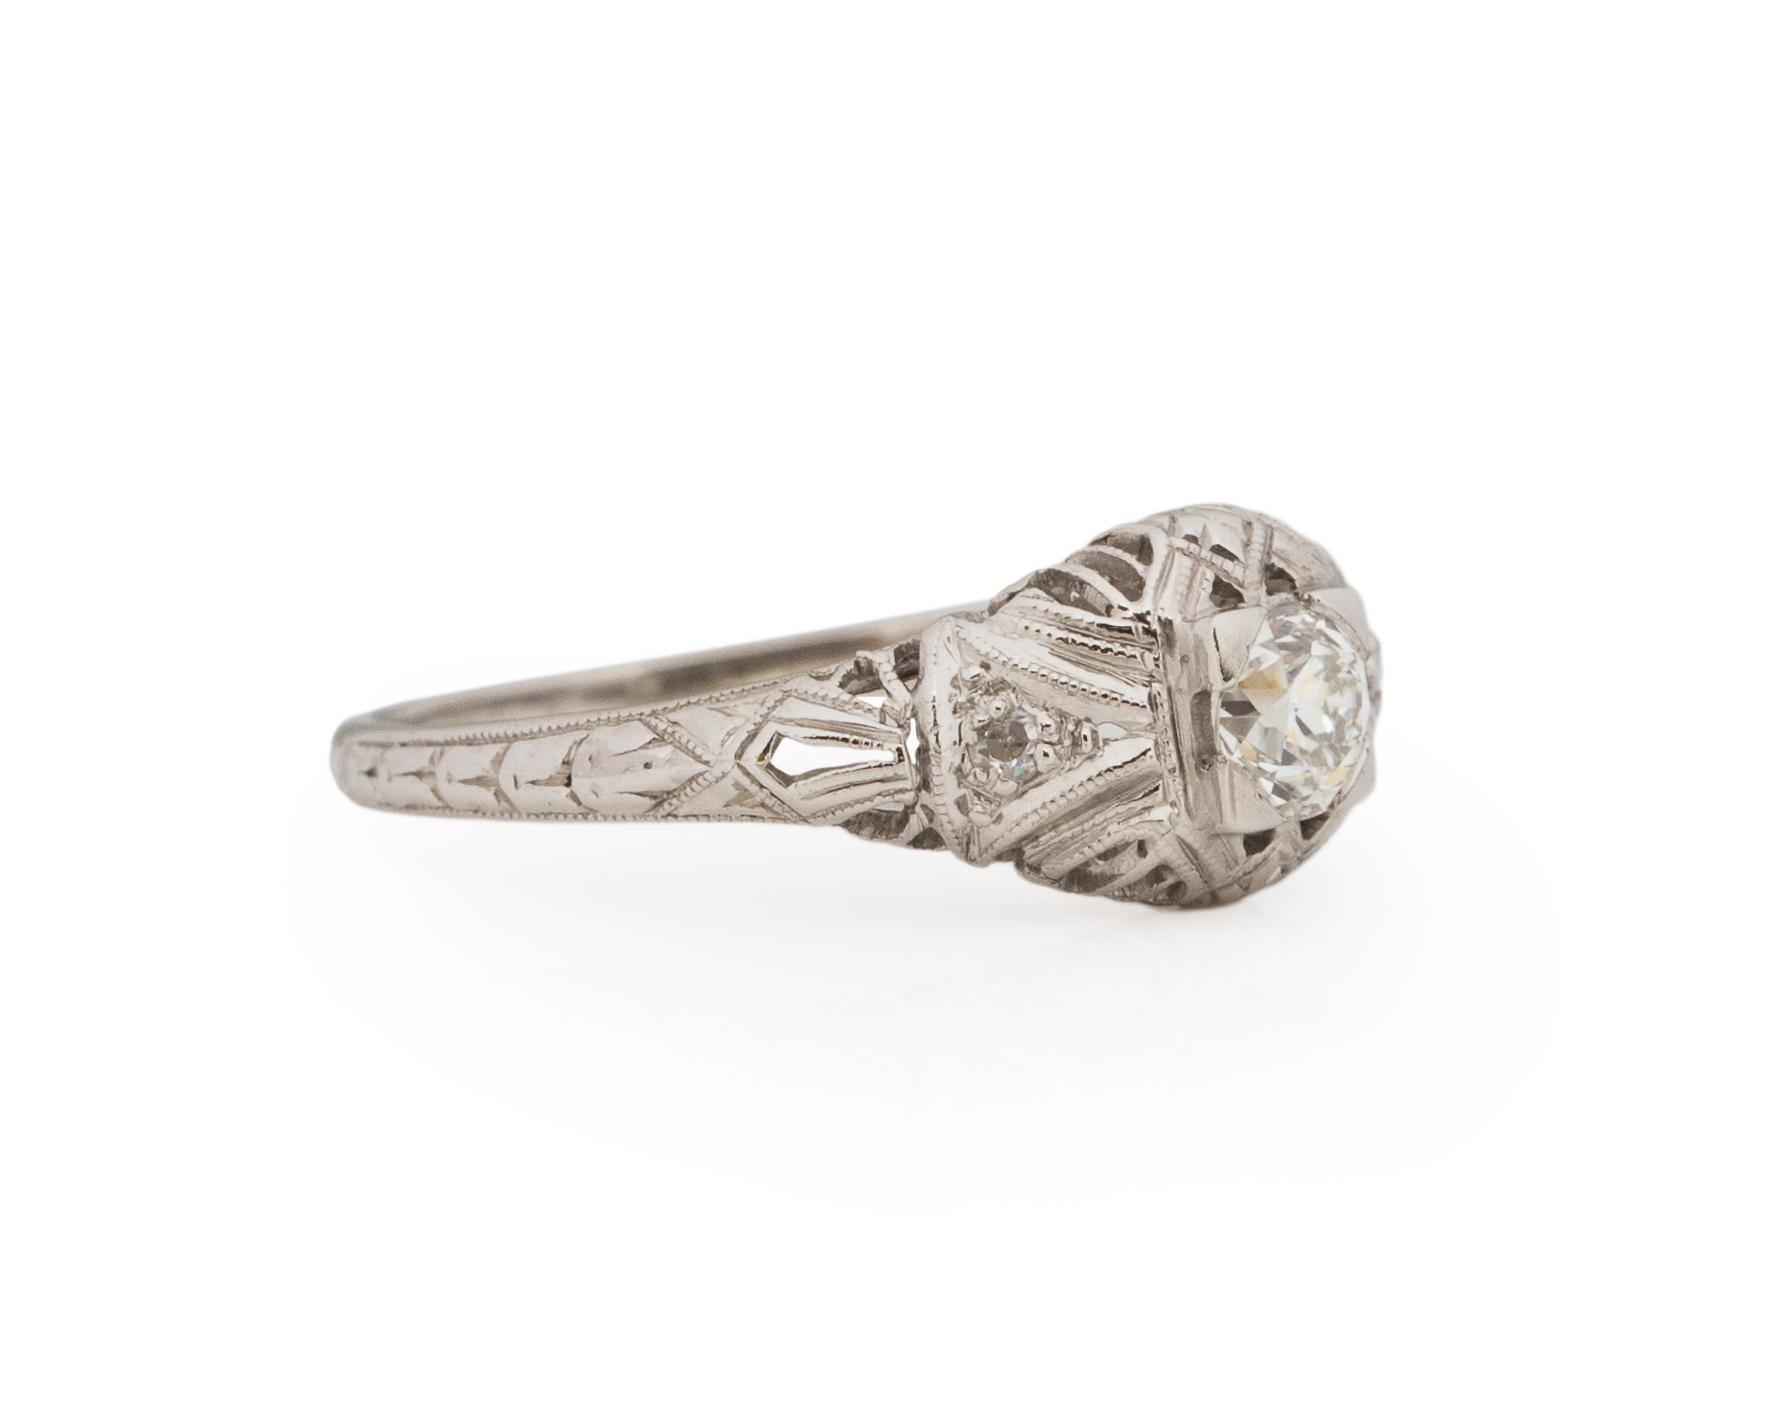 Ring Size: 6.5
Metal Type: Platinum [Hallmarked, and Tested]
Weight: 2.0 grams

Center Diamond Details:
Weight: .31ct
Cut: Old European brilliant
Color: F
Clarity: VS

Side Stone Details:
Weight: .08ct, total
Cut: Antique European Cut
Color: